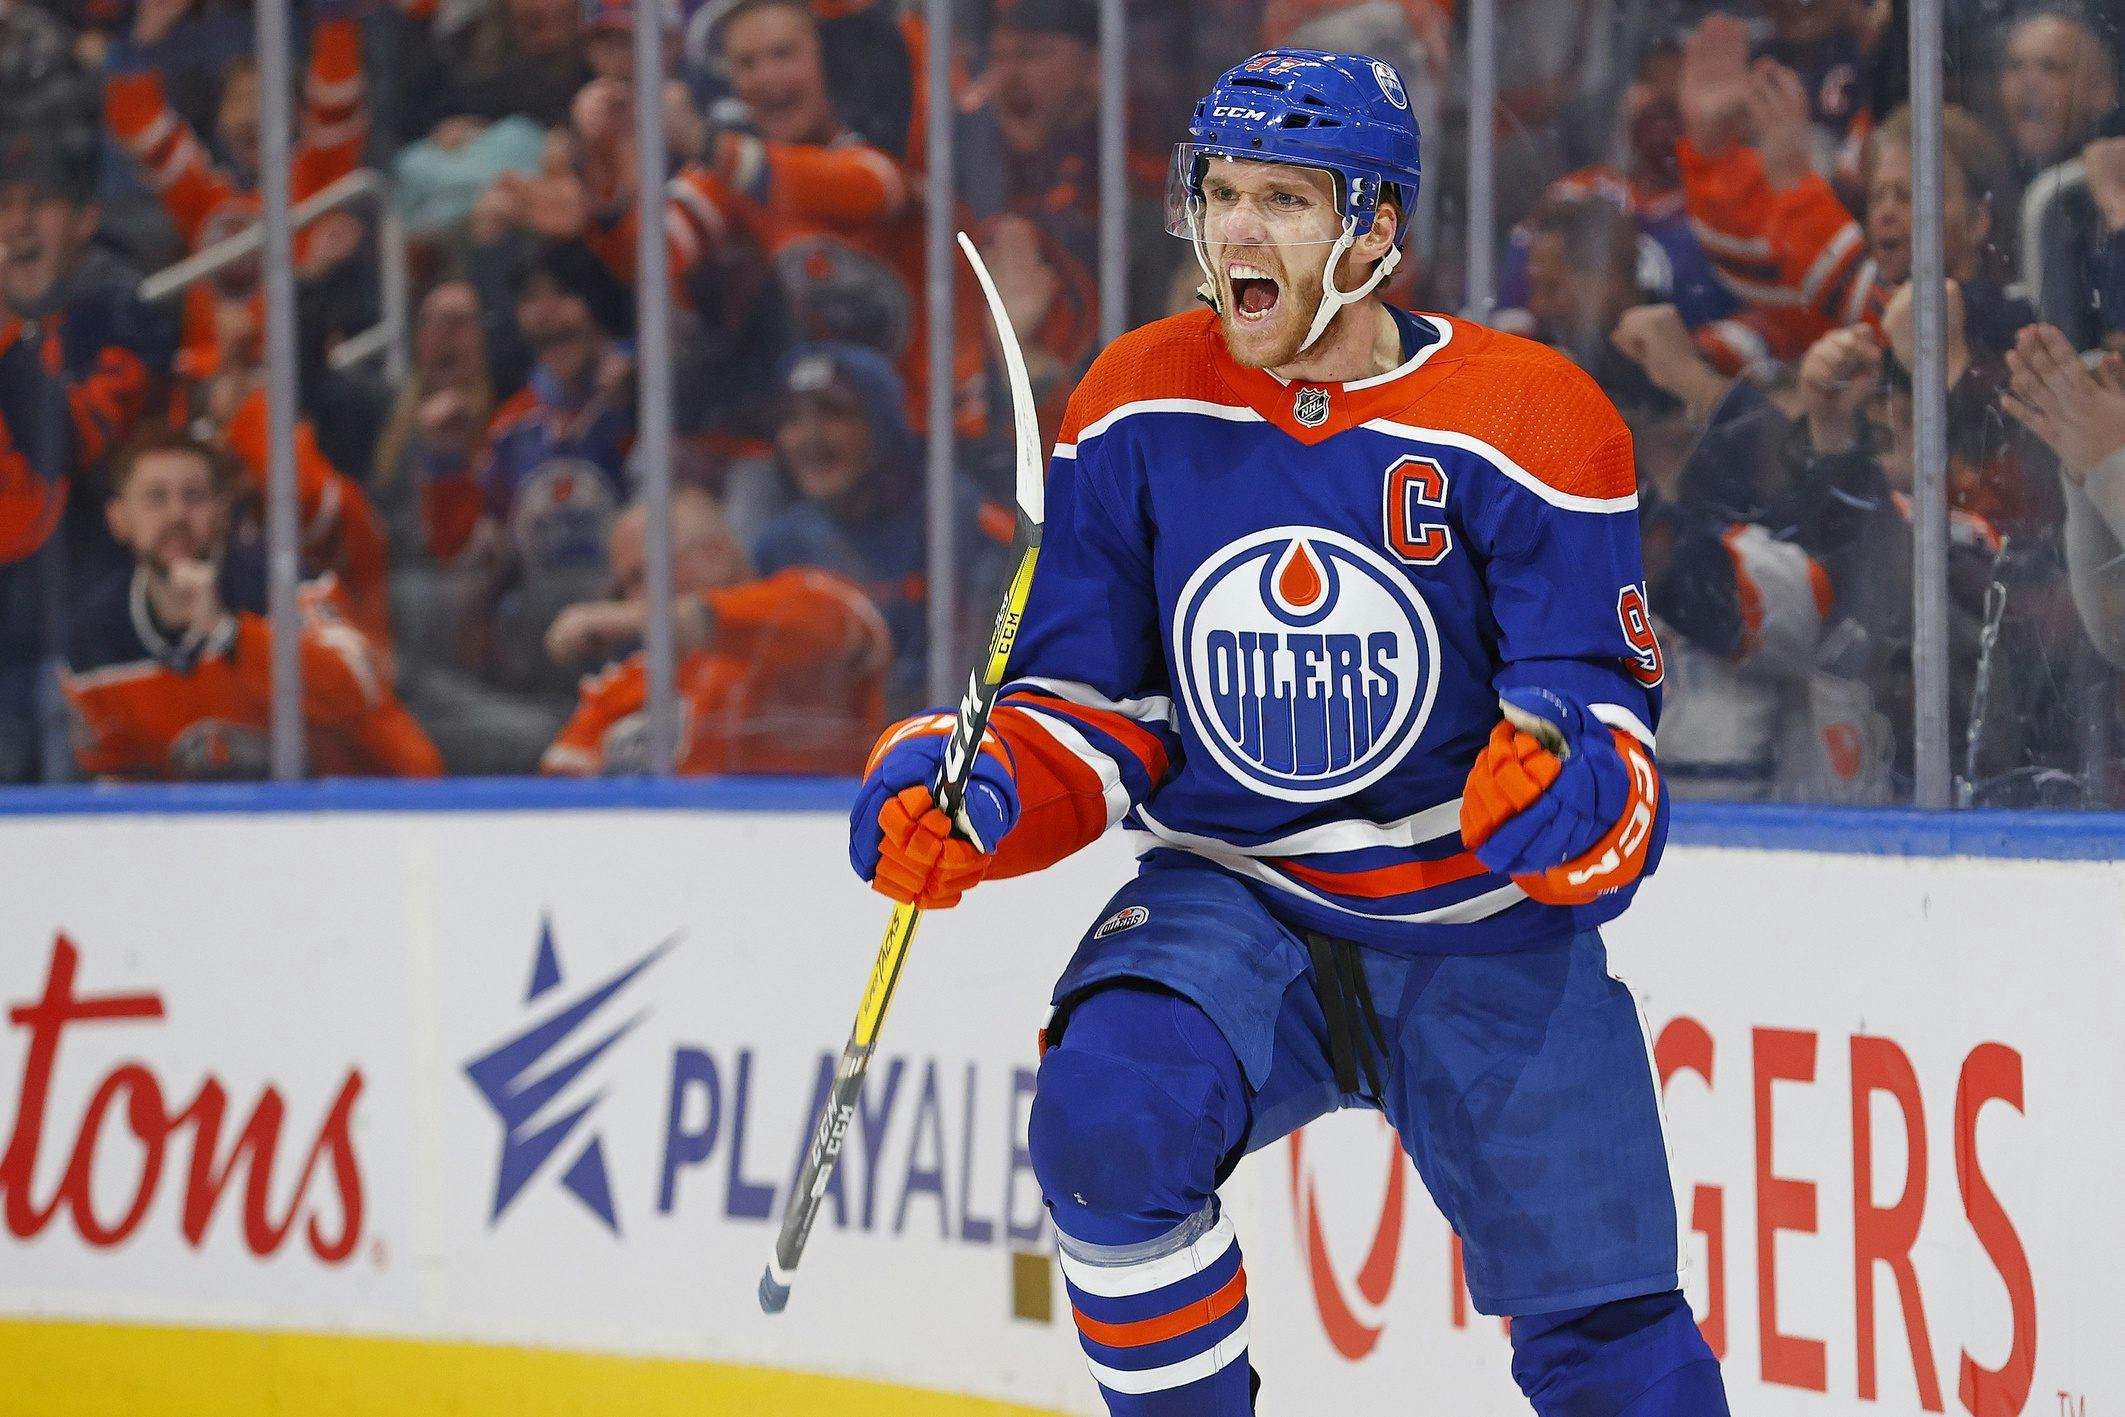 Edmonton Oilers Schedule 20232024 What is the Playoff, Home & Hockey